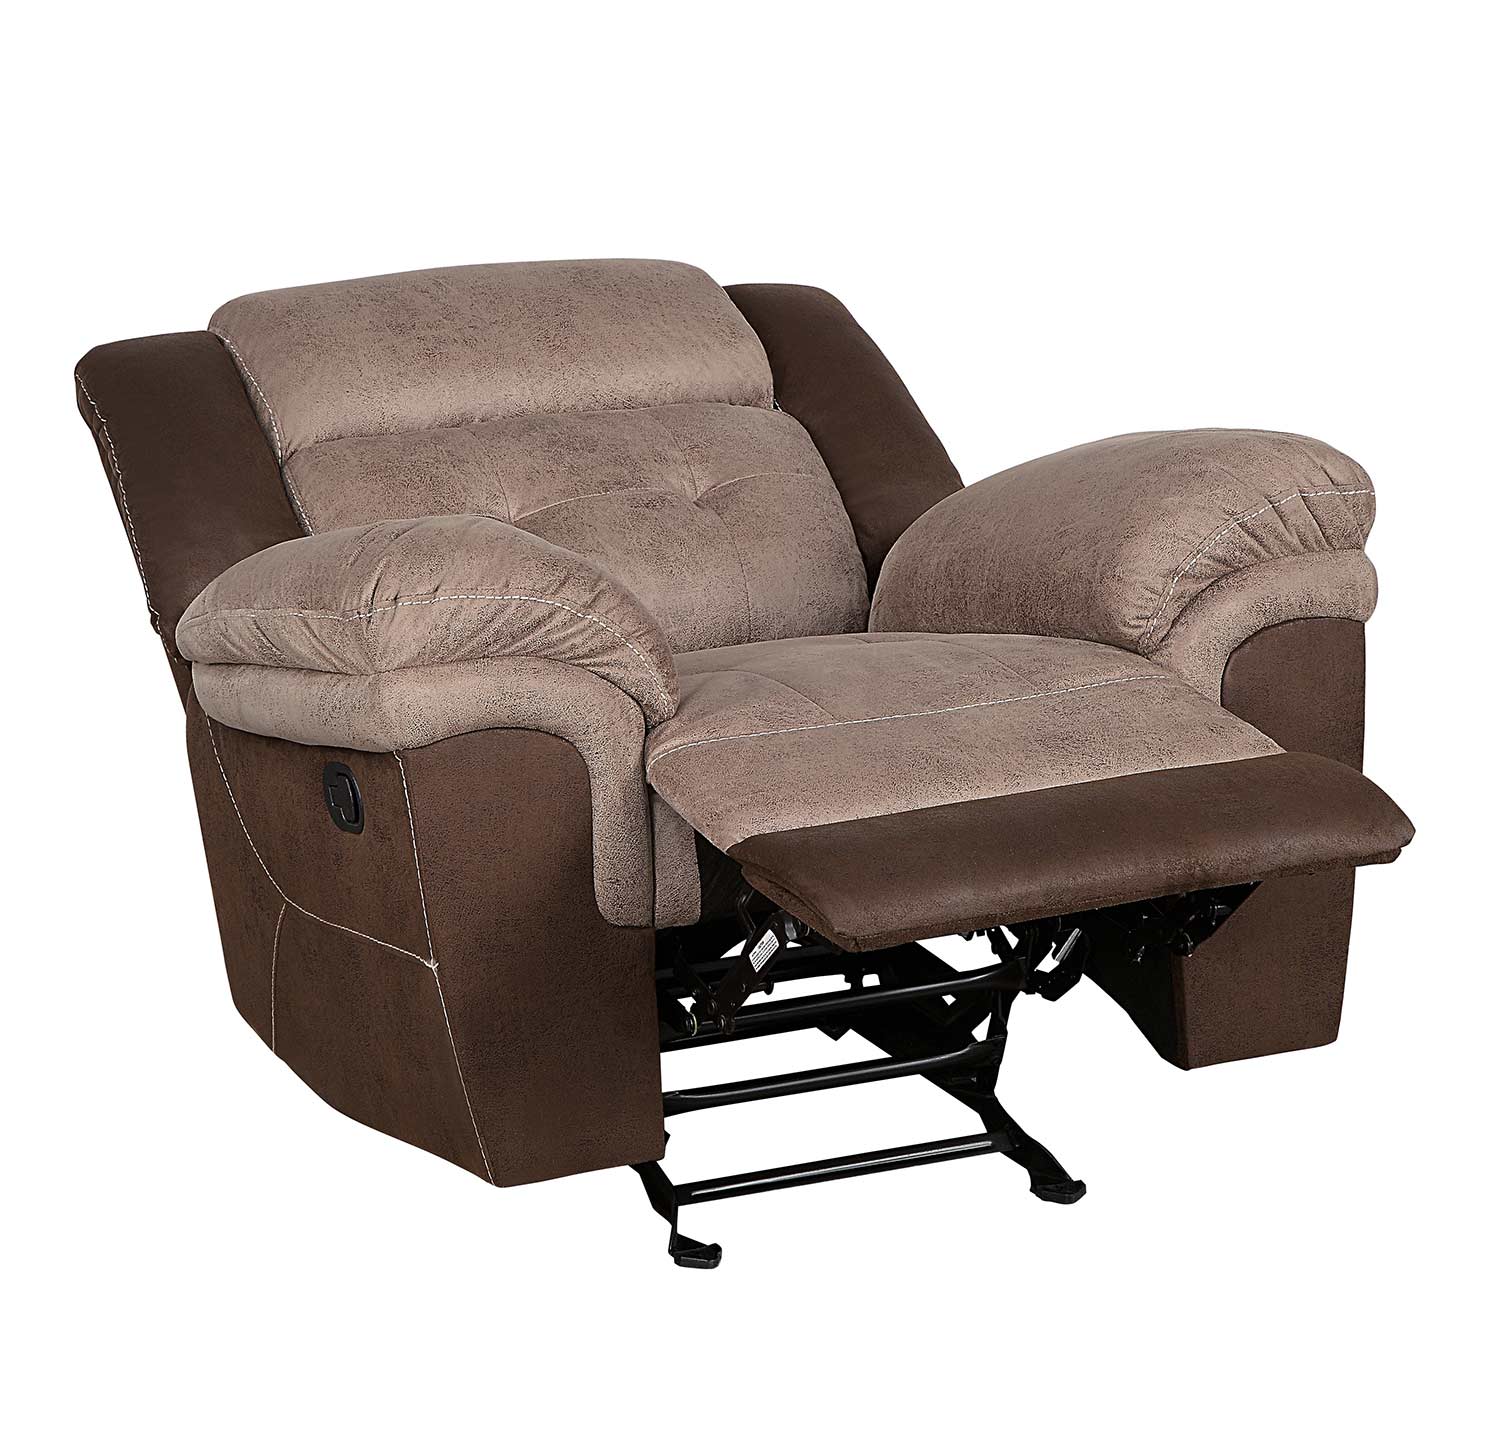 Homelegance Chai Glider Reclining Chair - Brown and dark brown polished microfiber